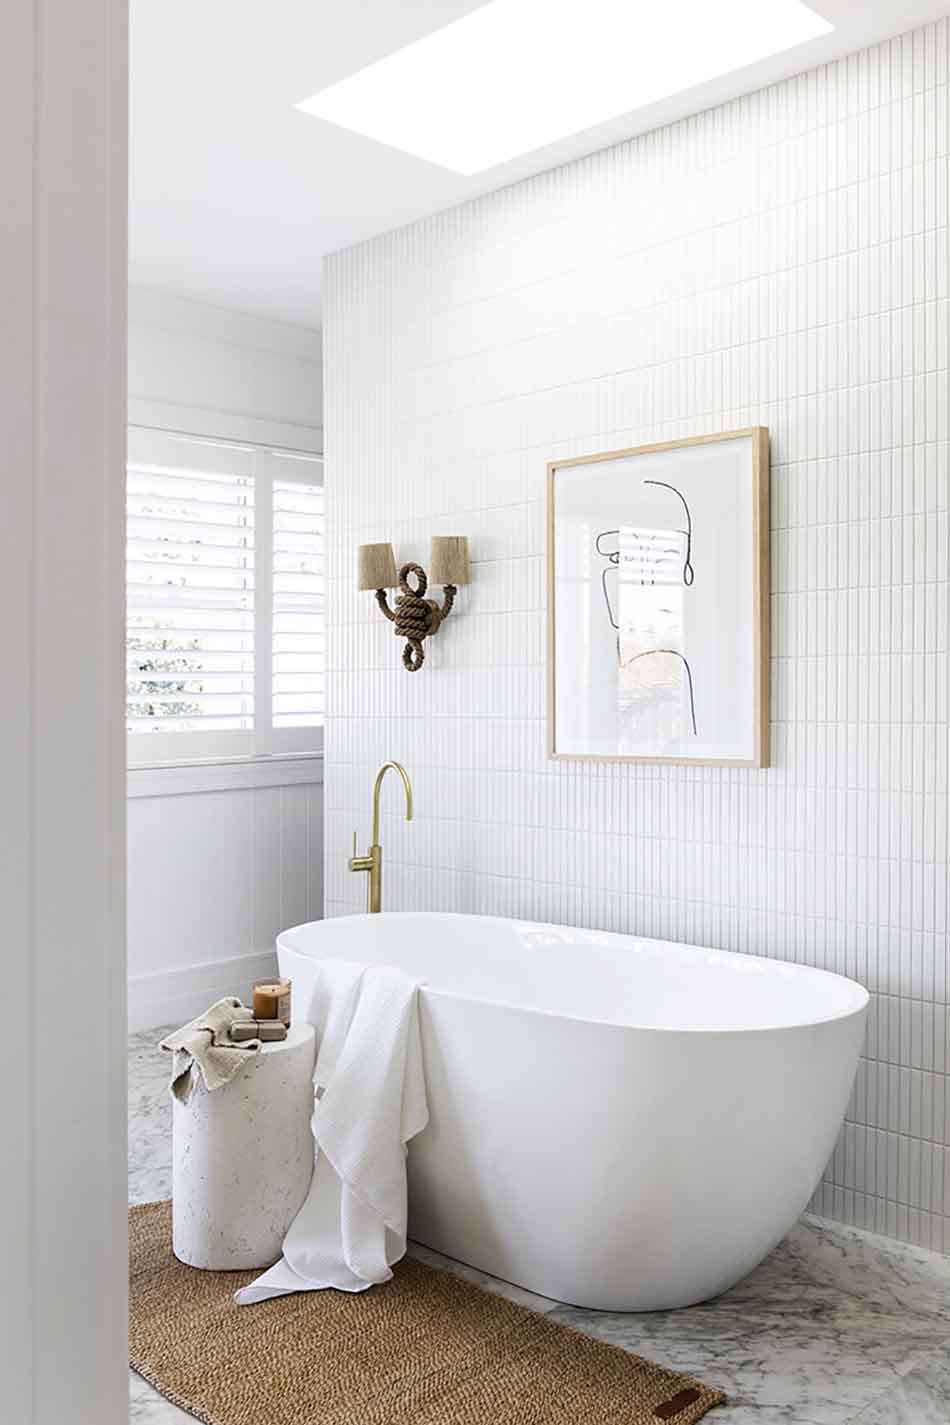 Freestanding vs Built-in Baths Pros and Cons